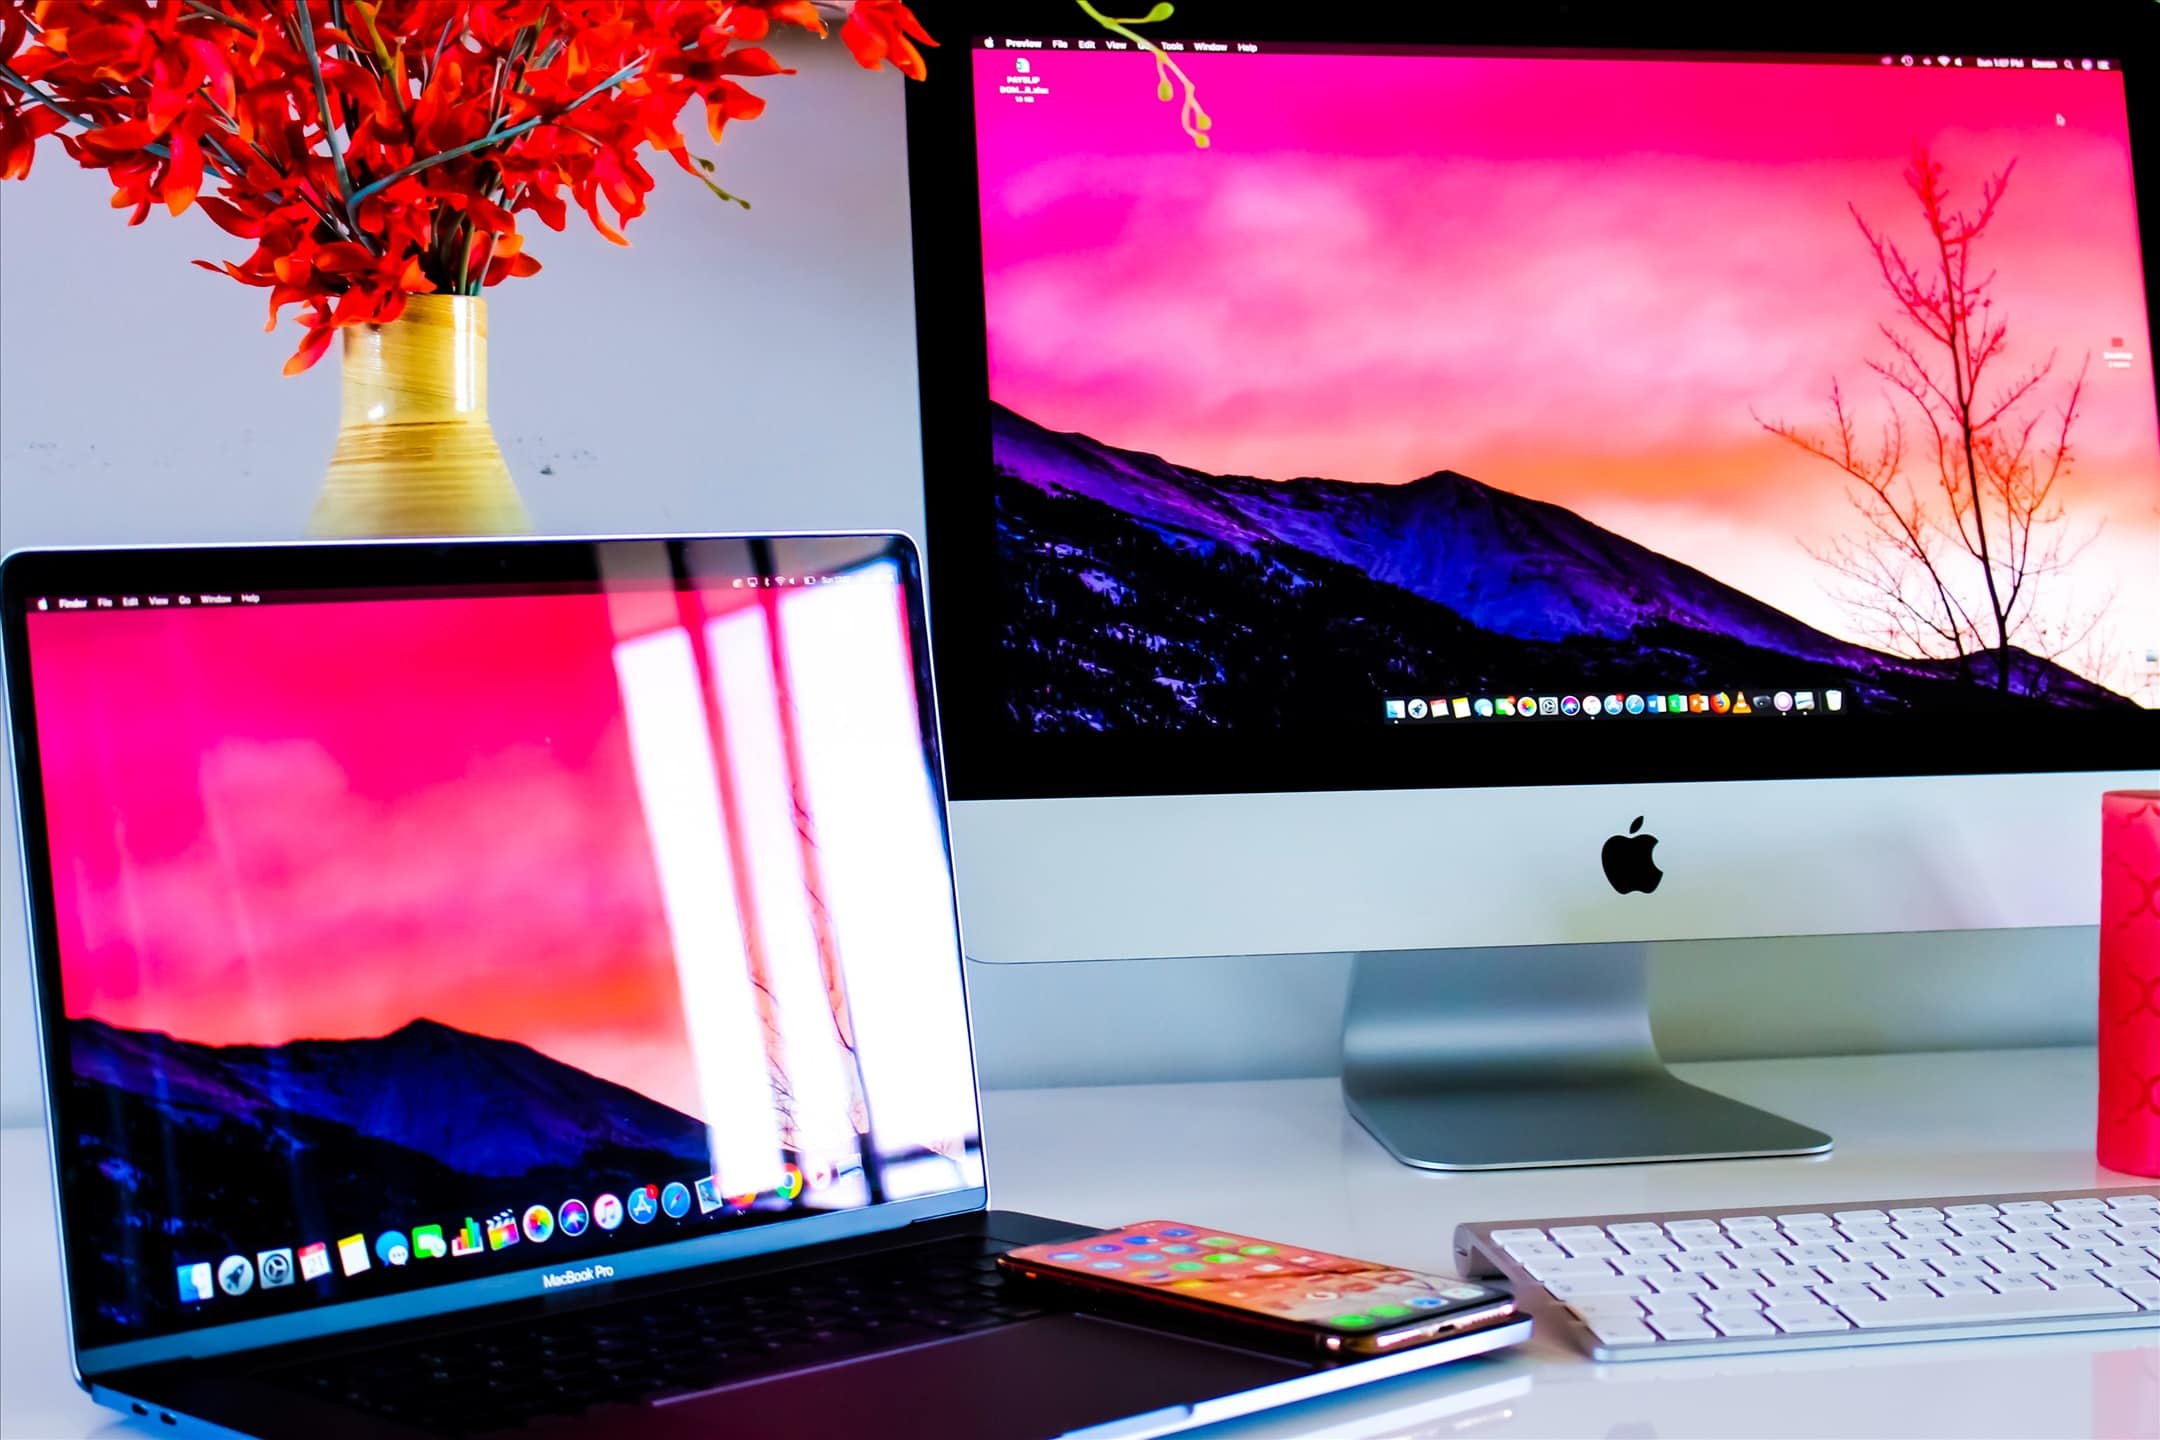 How to free up Other Storage space on Mac